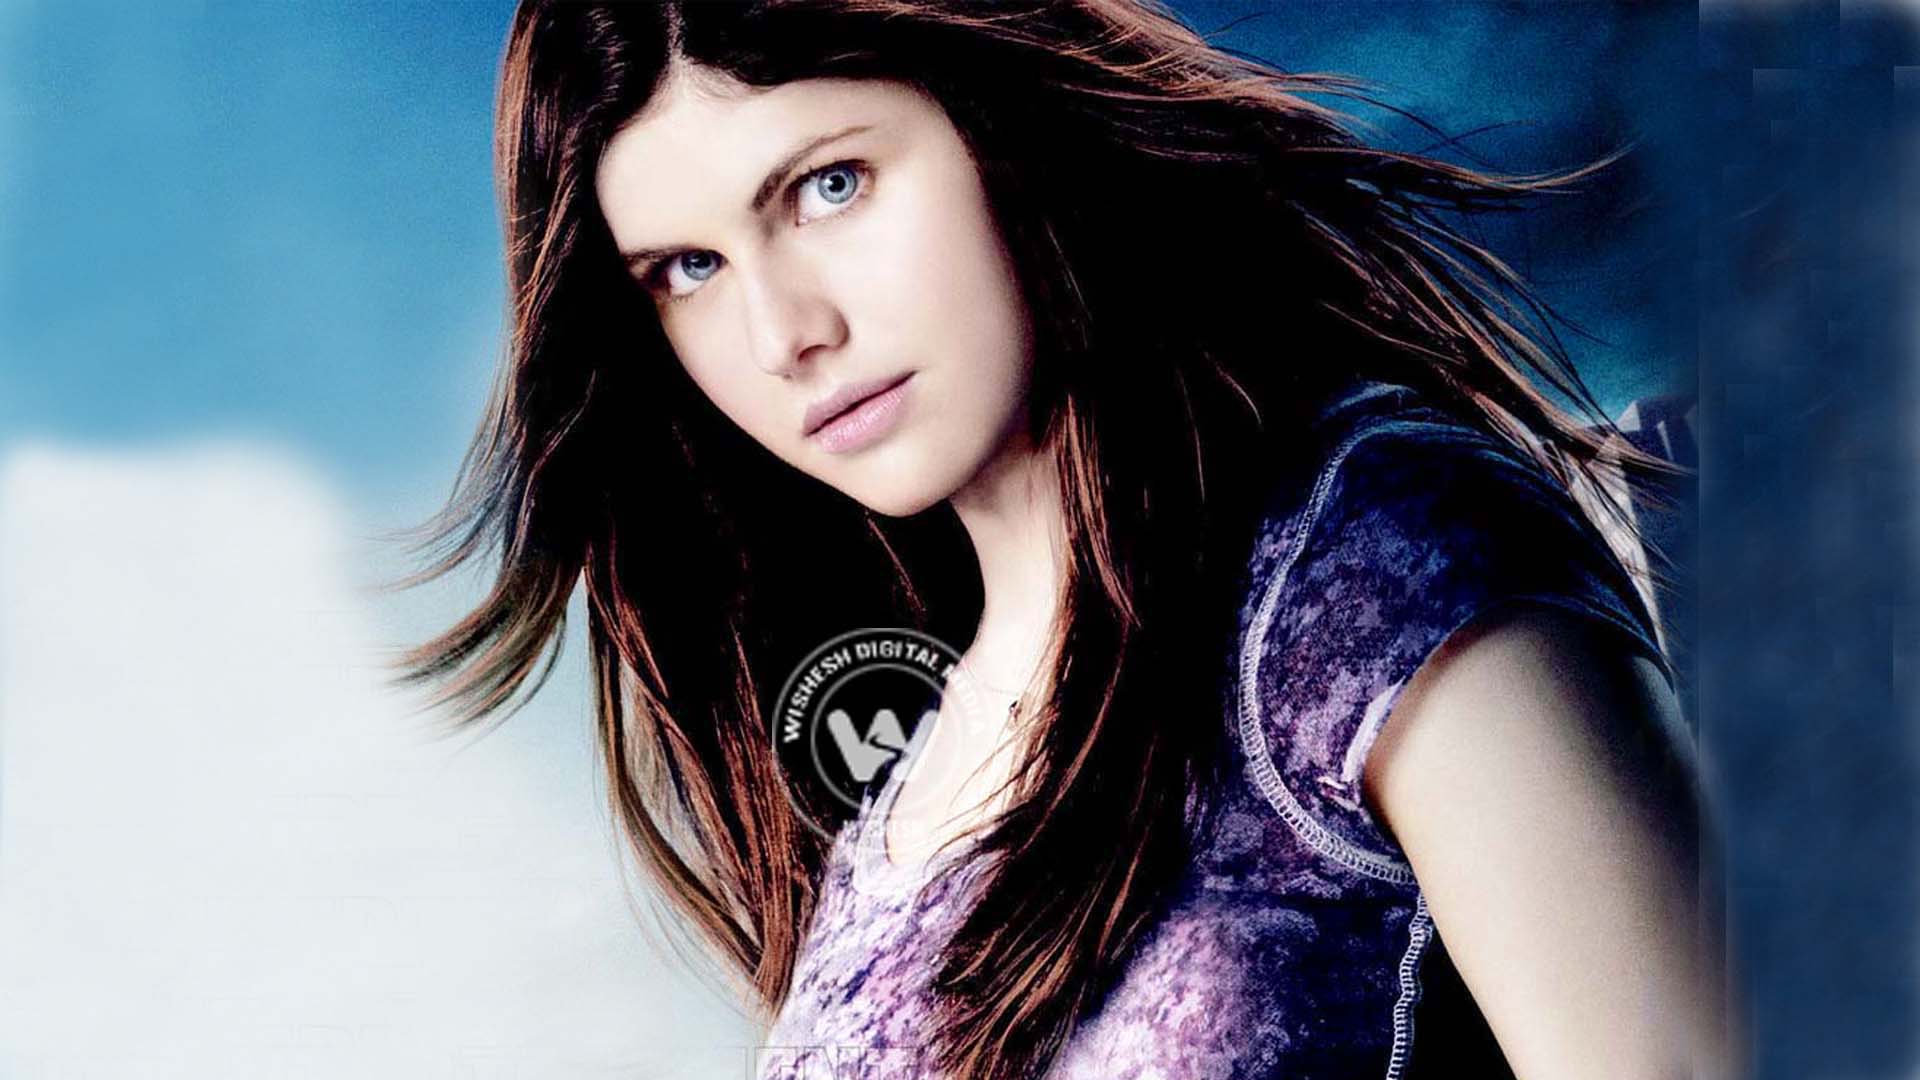 Alexandra Daddario Latest HD Wallpapers. | Alexandra Daddario Latest Wallpapers. | Alexandra Daddario Latest Pivtures | Wallpaper 6of 10